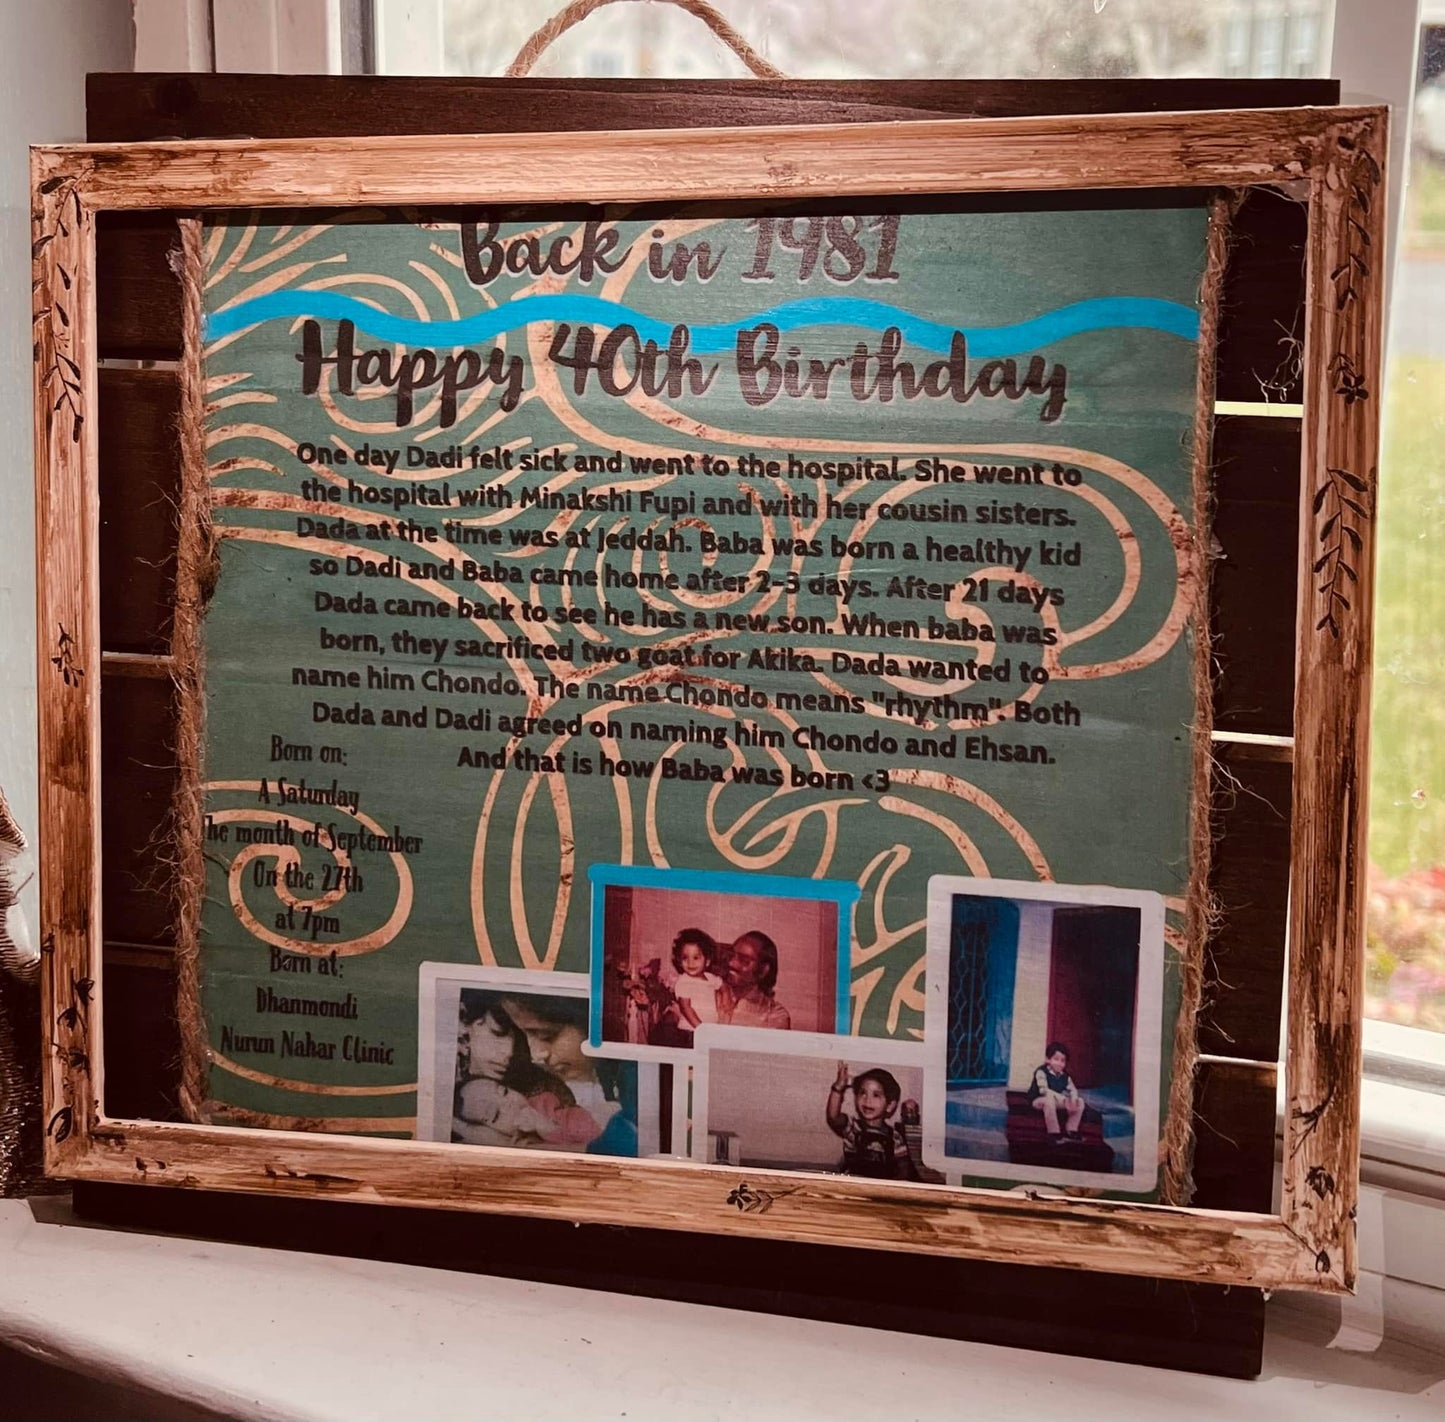 Framed and personalized gift for special occasions